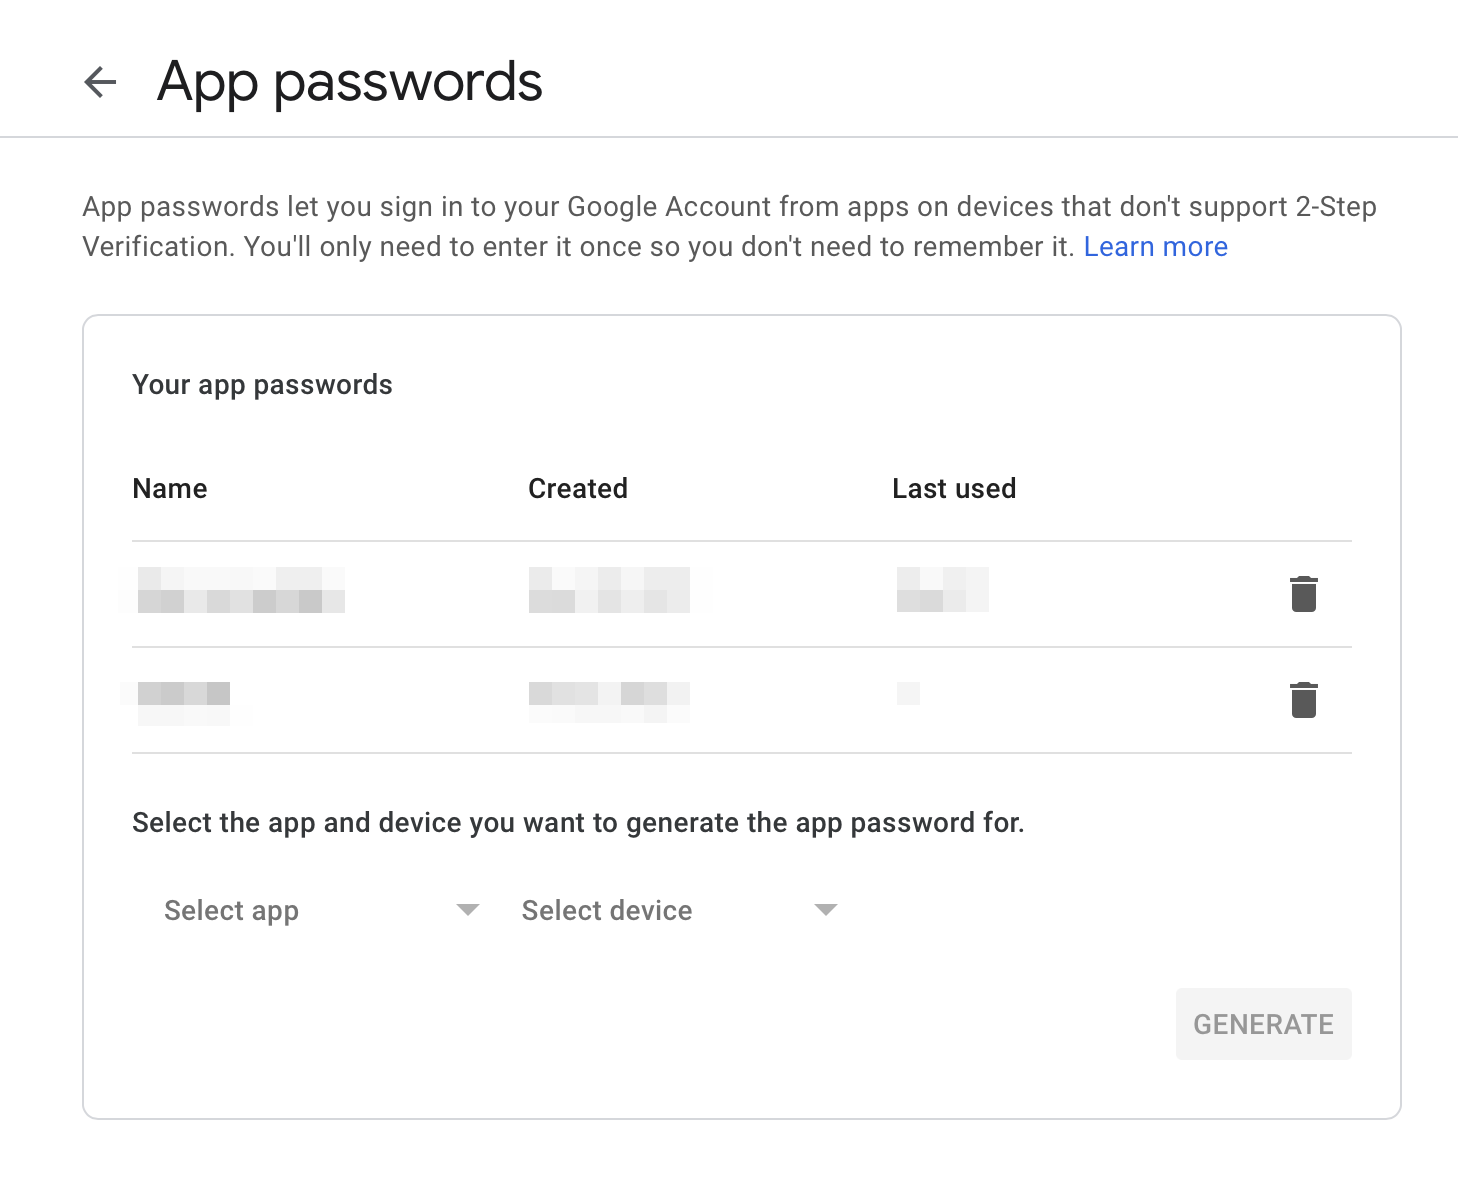 Add a new application password